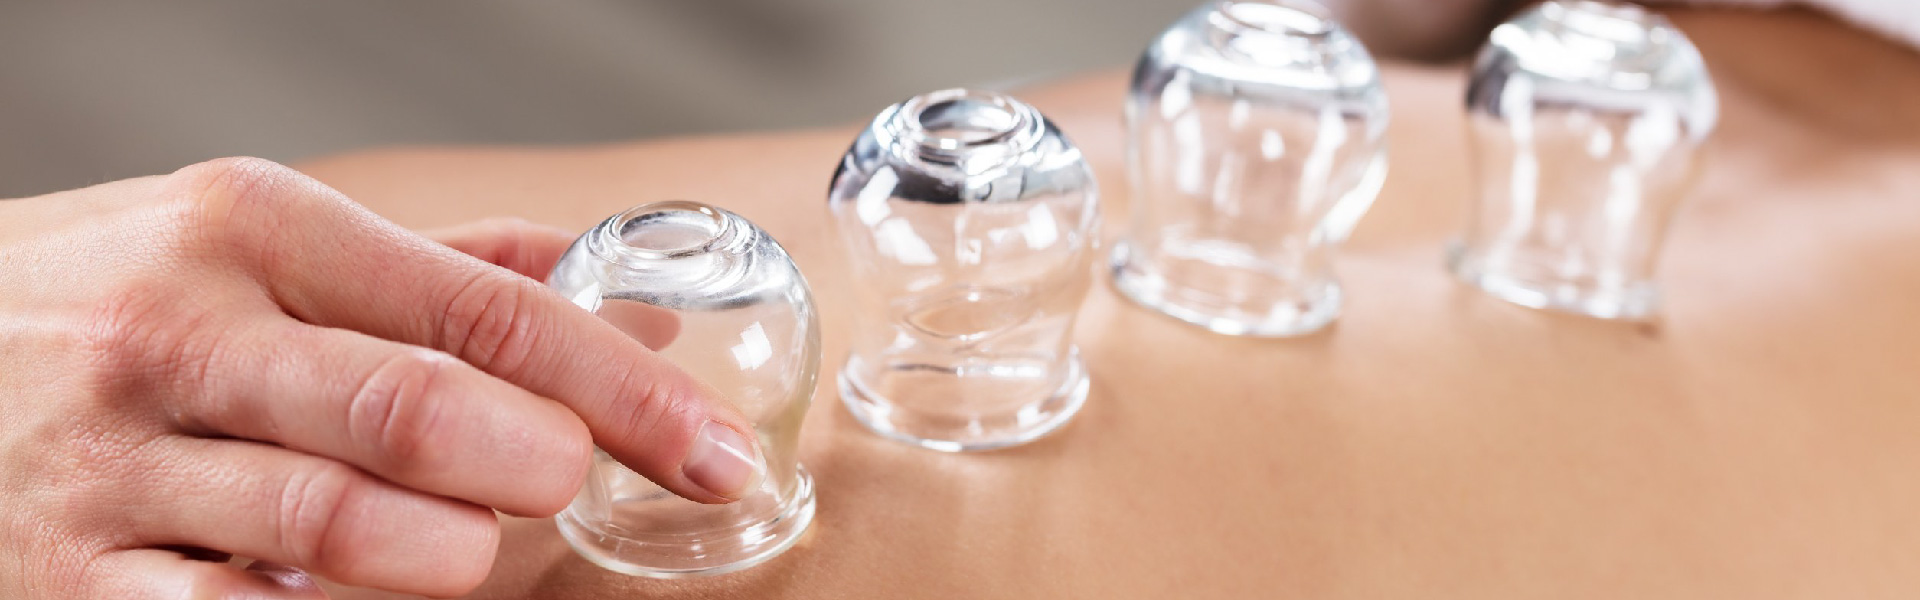 Cupping Therapy near Pine Hills Florida